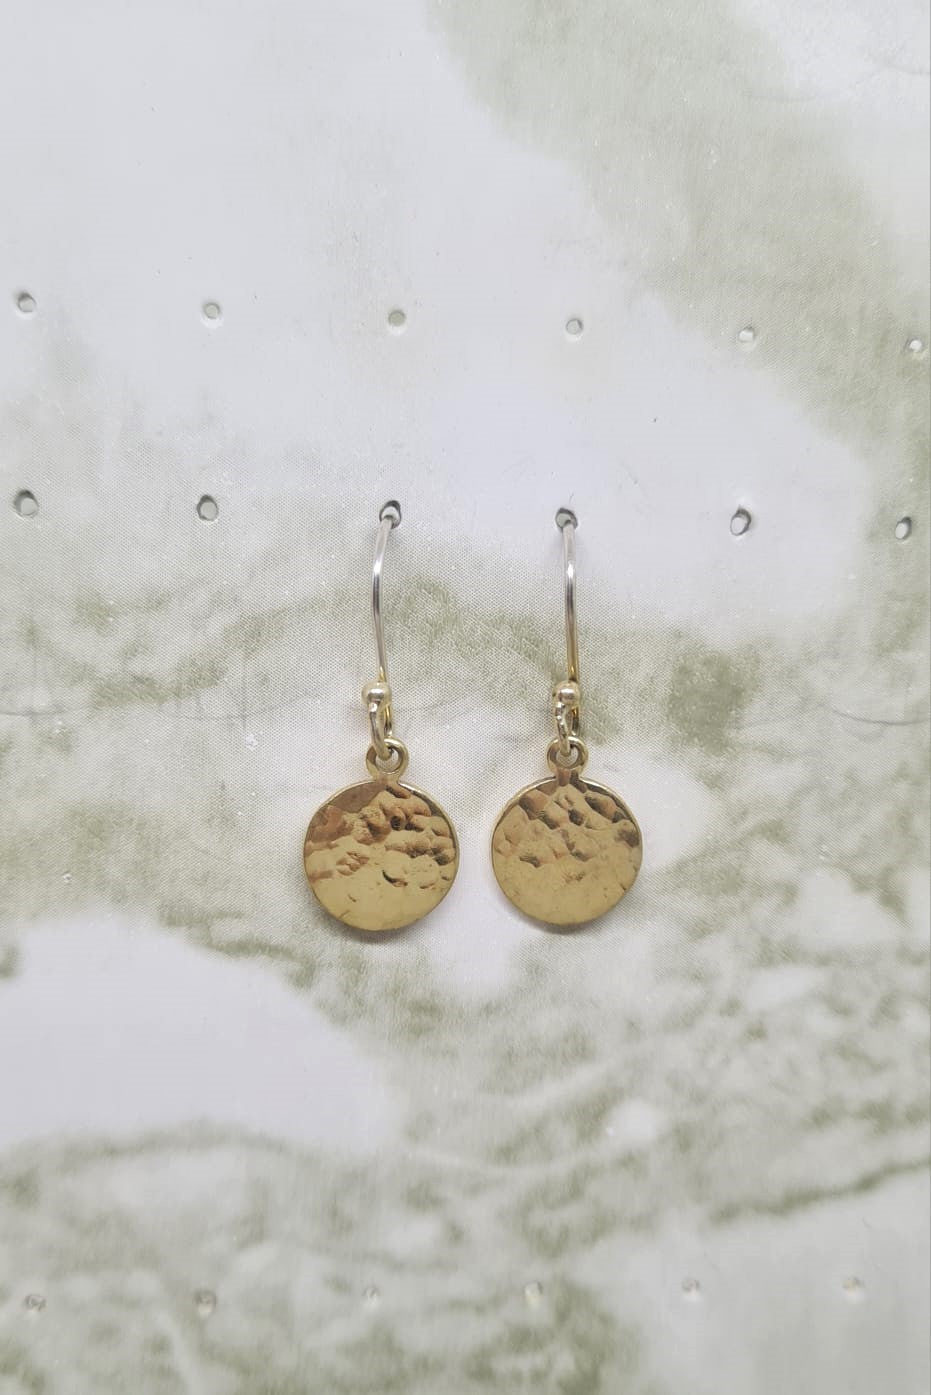 Handmade Brass Yellow Gold plated and Sterling Silver Sunrise earrings.